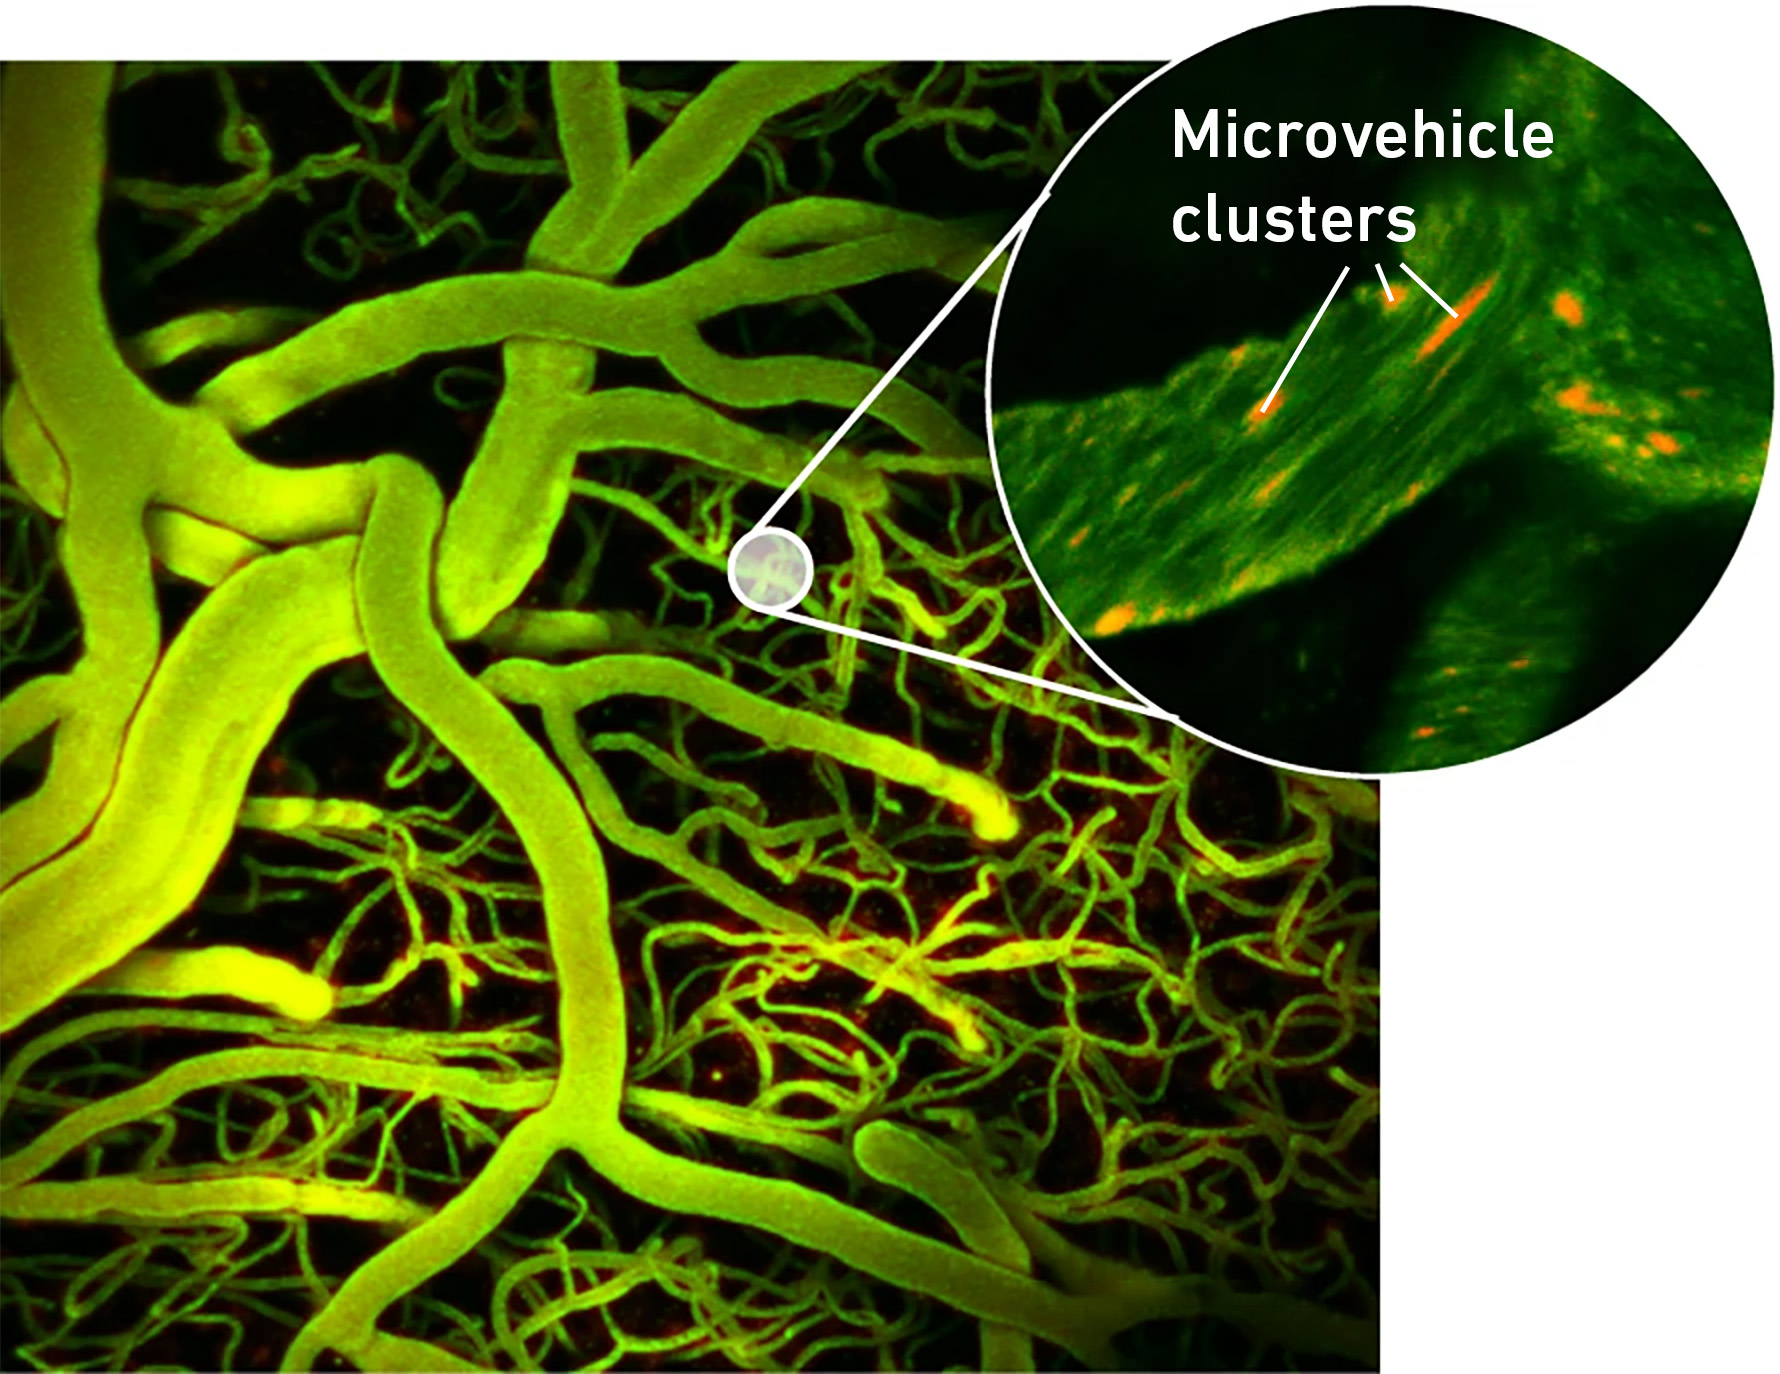 Enlarged view: Microscopy image showing the microvehicles.